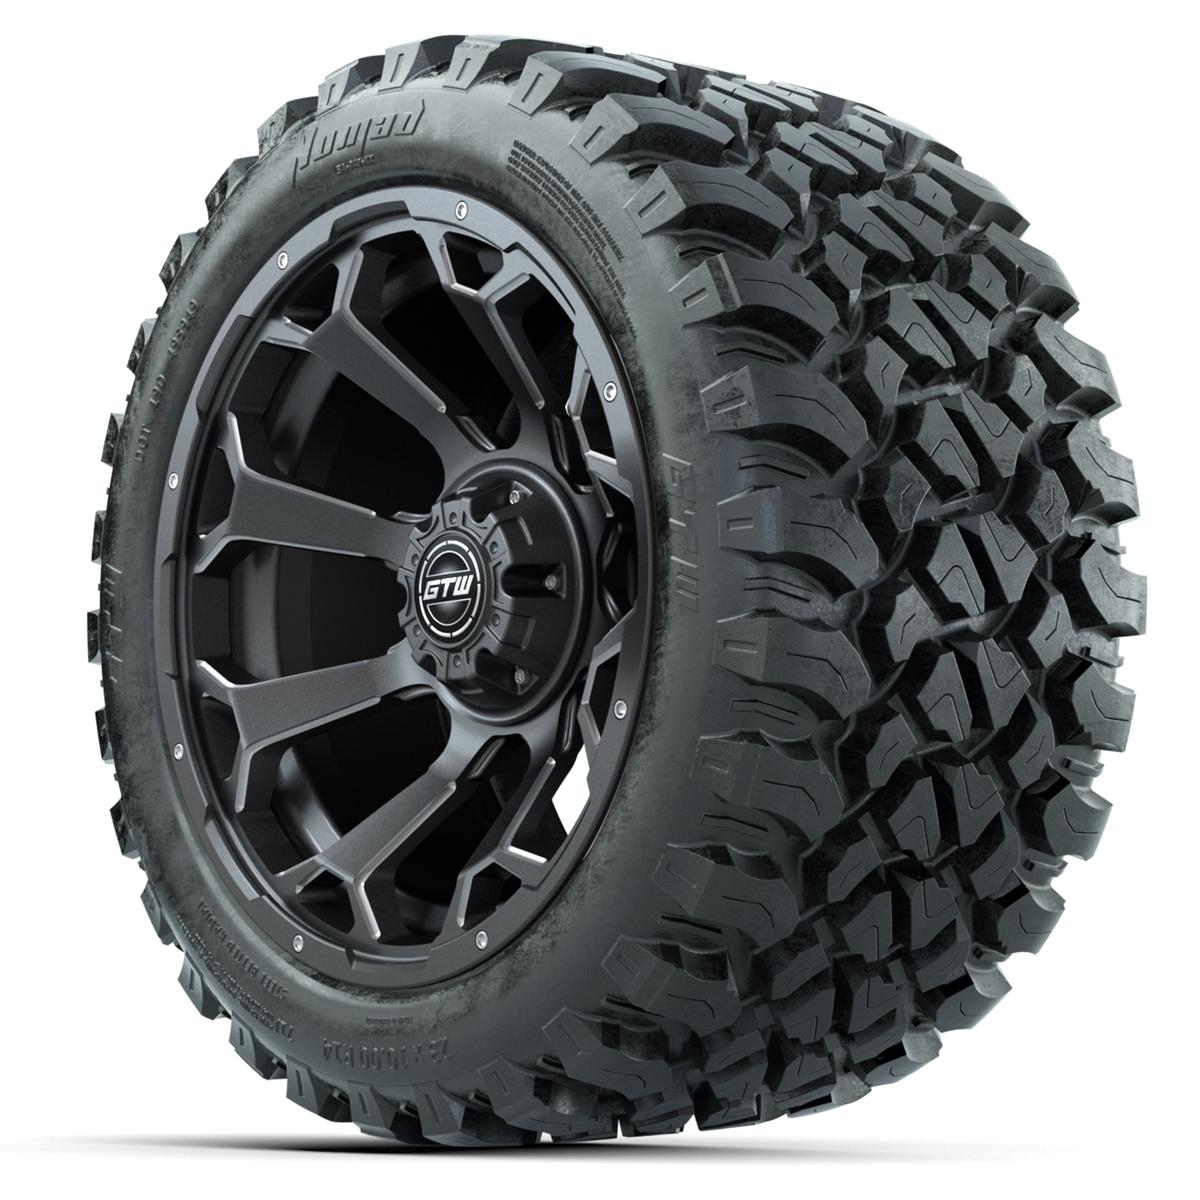 Set of (4) 14 in GTW Raven Wheels with 23x10-14 GTW Nomad All-Terrain Tires